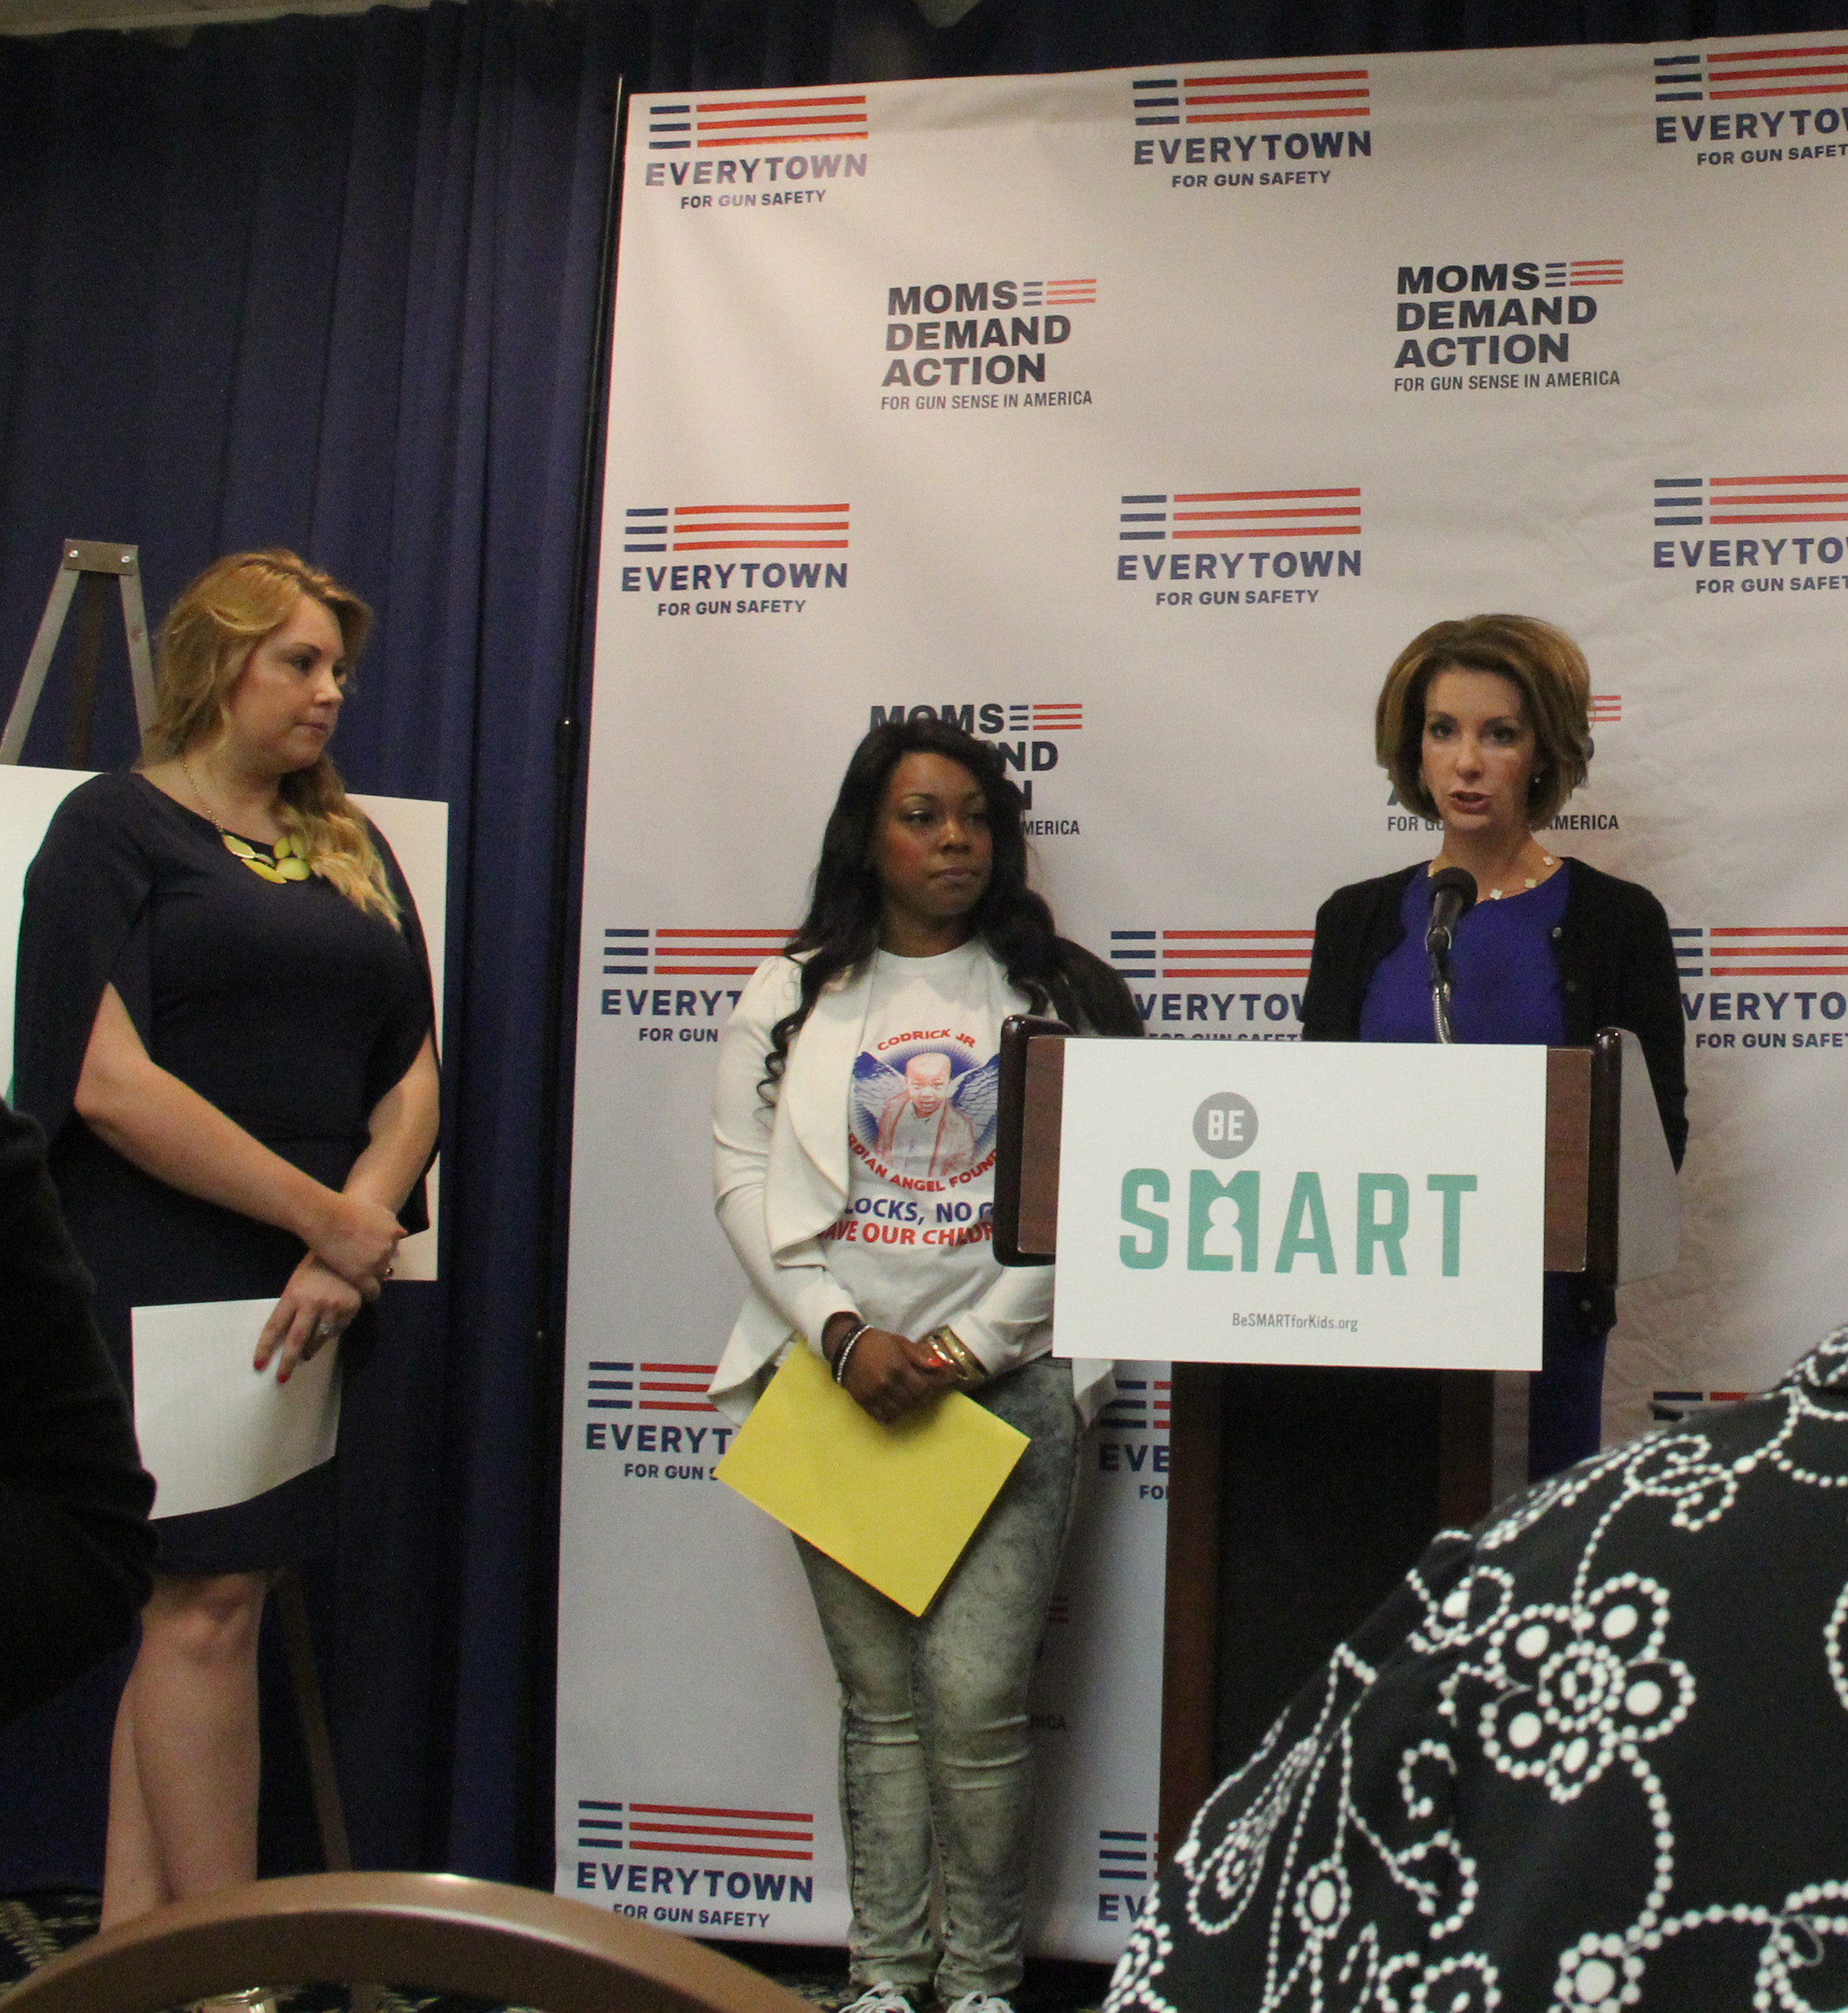 Shannon Watts, the founder of Moms Demand Action for Gun Sense in America, speaks at a conference in Washington D.C. on May 4, 2015, while speakers Ashley Beal (center) and Misty Uribe (left) look on. (Yinmeng Liu/MEDILL NSJI)